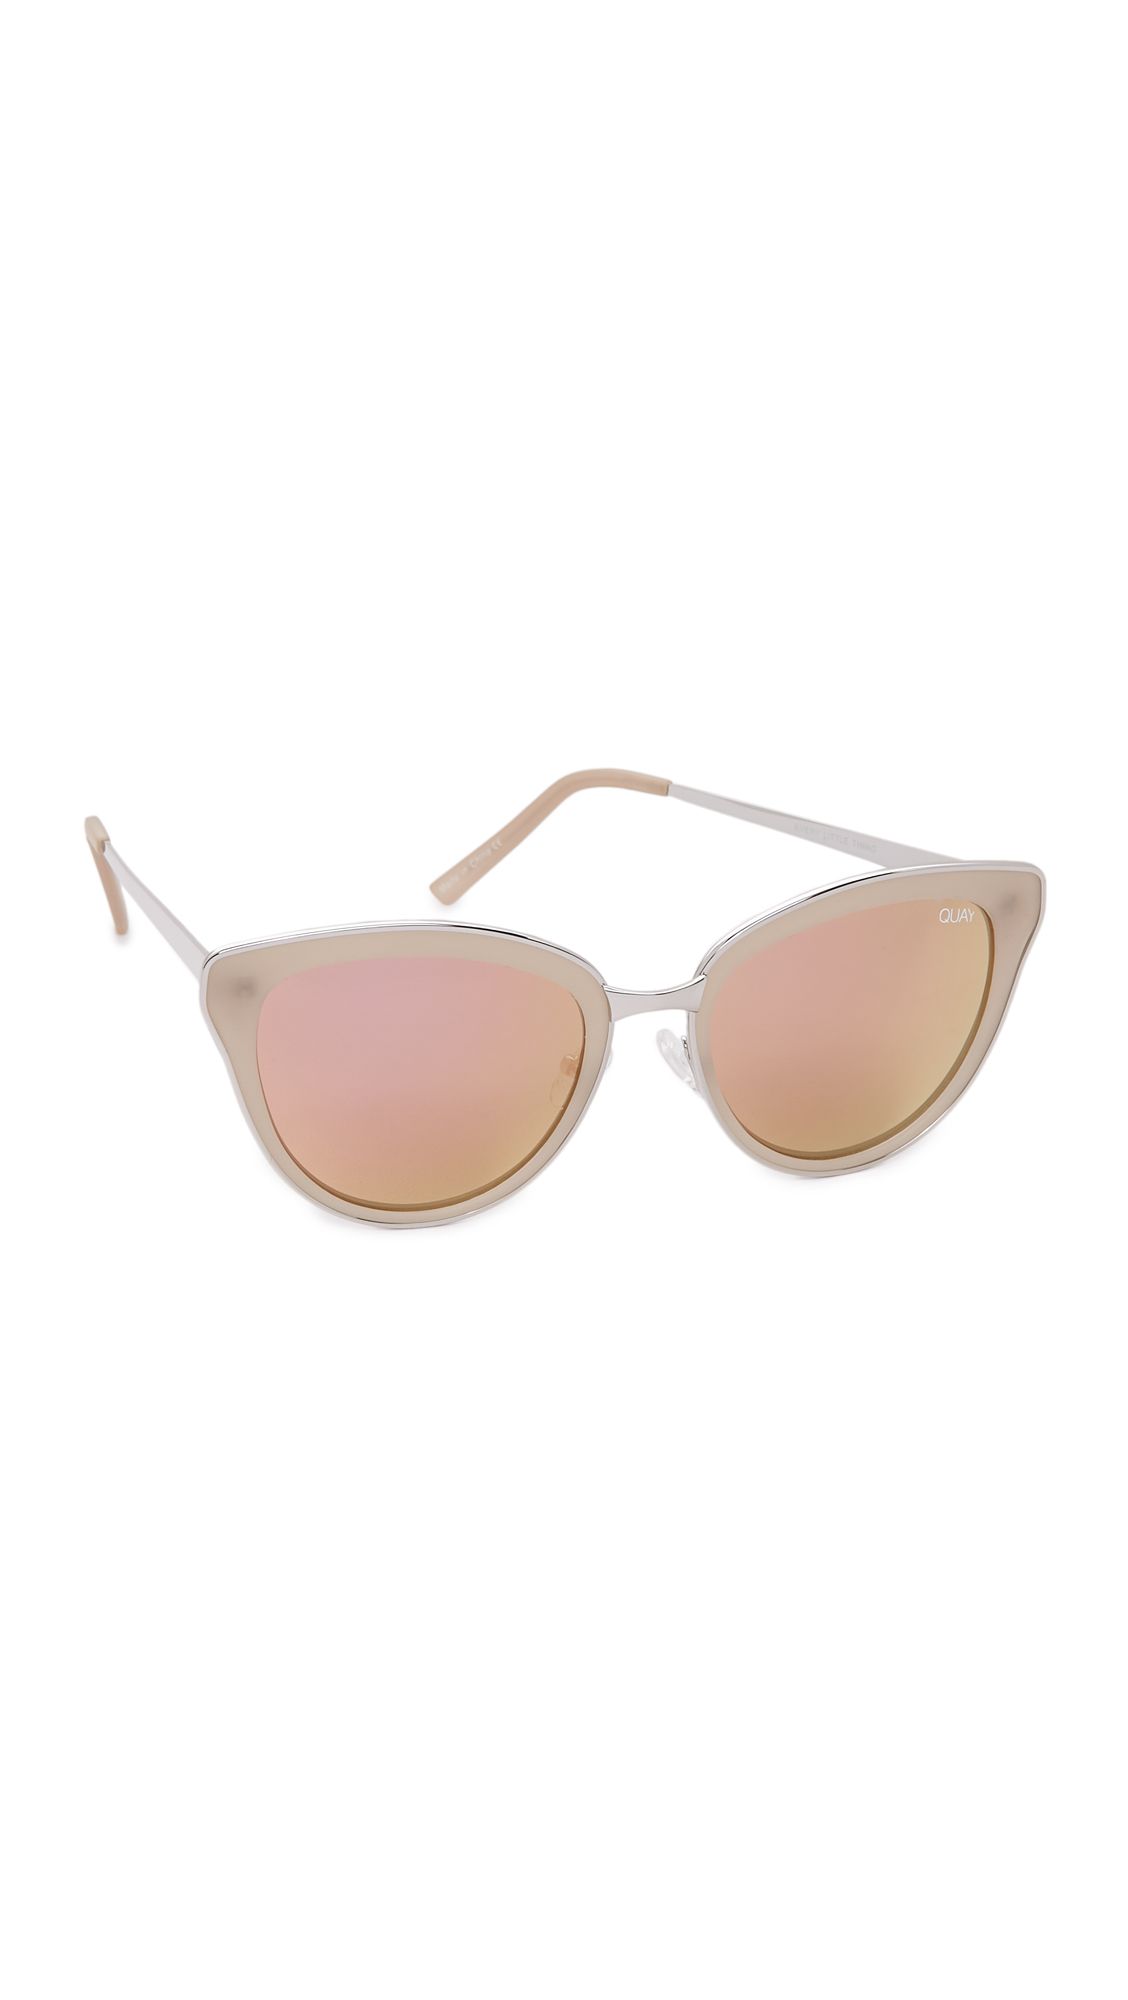 Every Little Thing Sunglasses | Shopbop